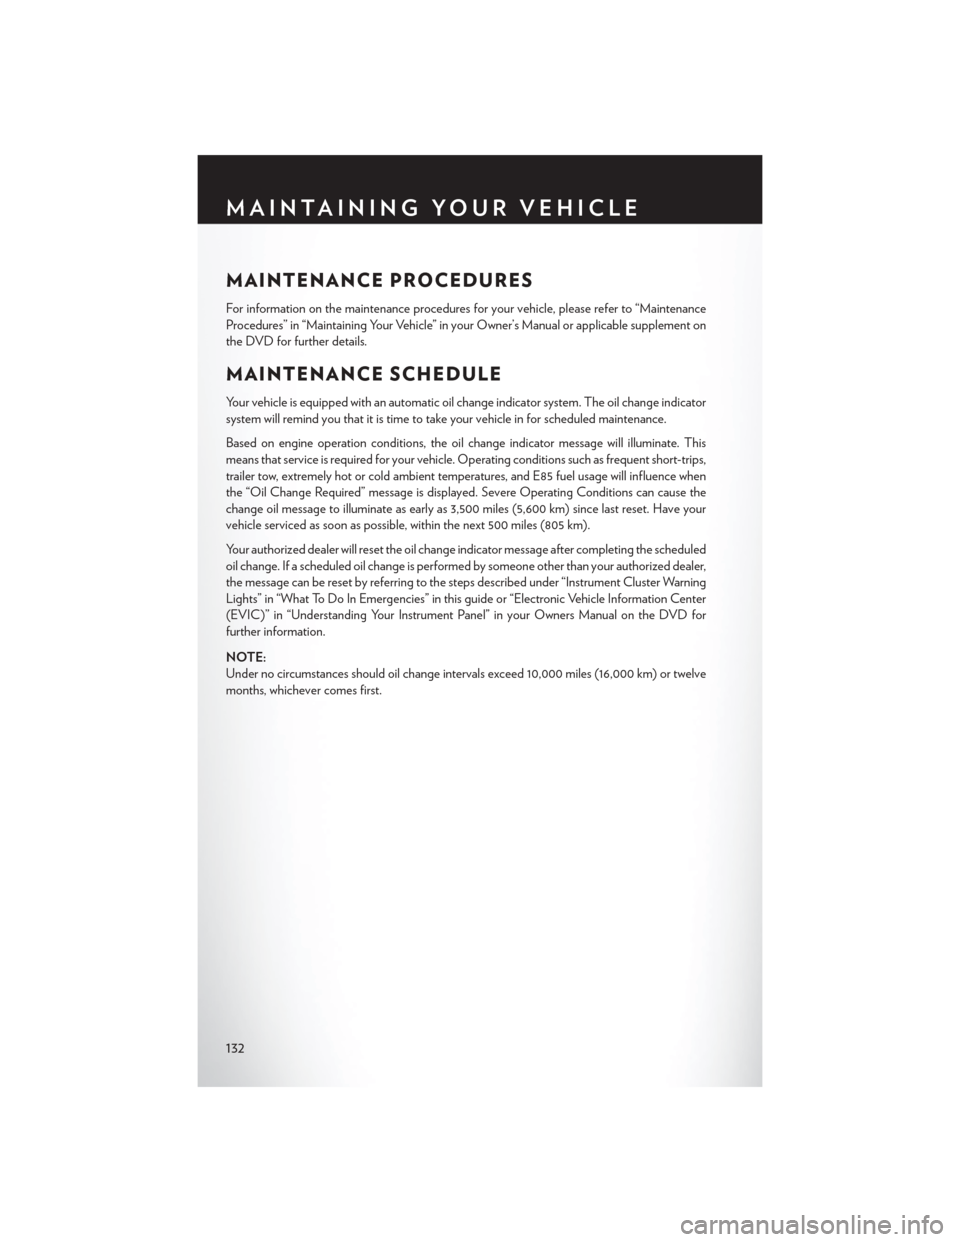 CHRYSLER TOWN AND COUNTRY 2015 5.G User Guide MAINTENANCE PROCEDURES
For information on the maintenance procedures for your vehicle, please refer to “Maintenance
Procedures” in “Maintaining Your Vehicle” in your Owner’s Manual or applic